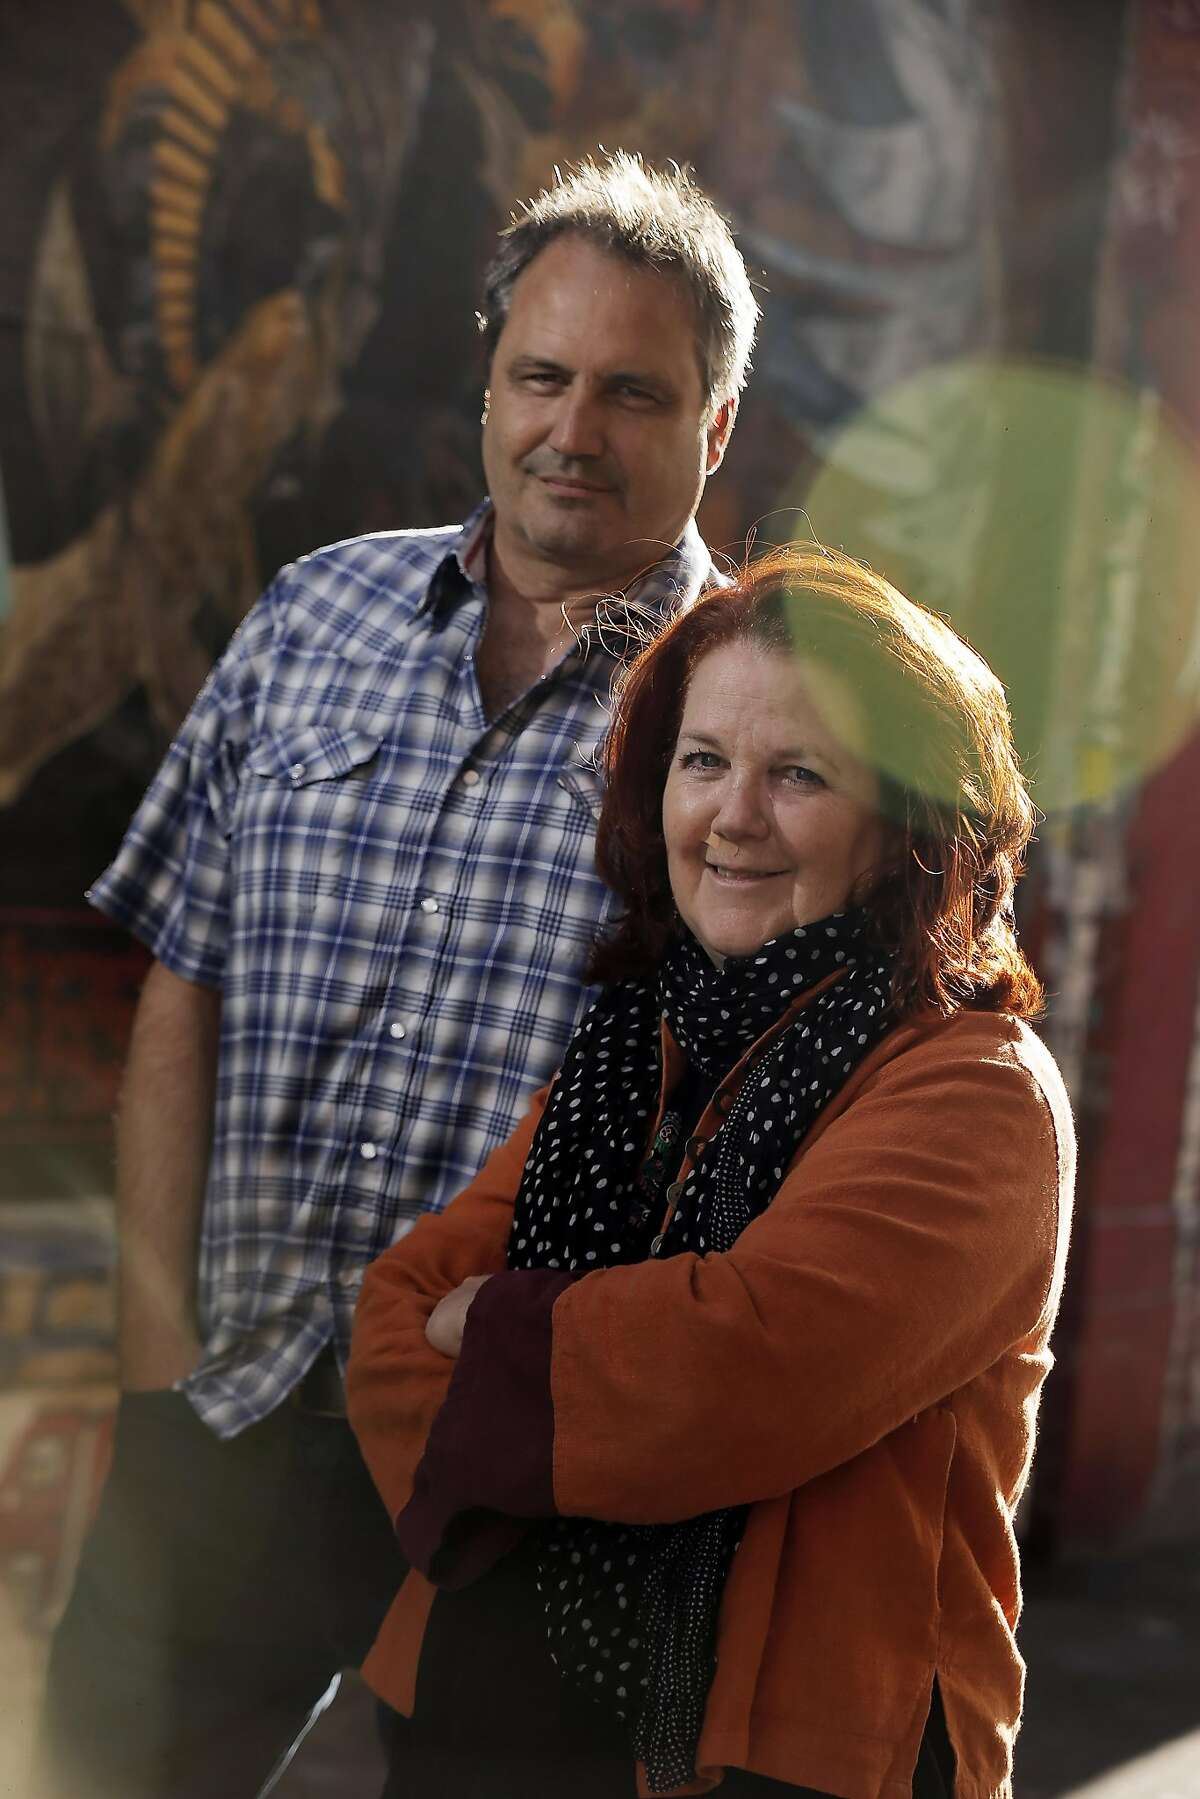 Litquake founders Jack Boulware, left, and Jane Ganahl, right, in Clarion Alley in San Francisco, Calif.,. on Wednesday, September 17, 2014. Litquake, San Francisco's annual literary festival, is celebrating its 15th anniversary.